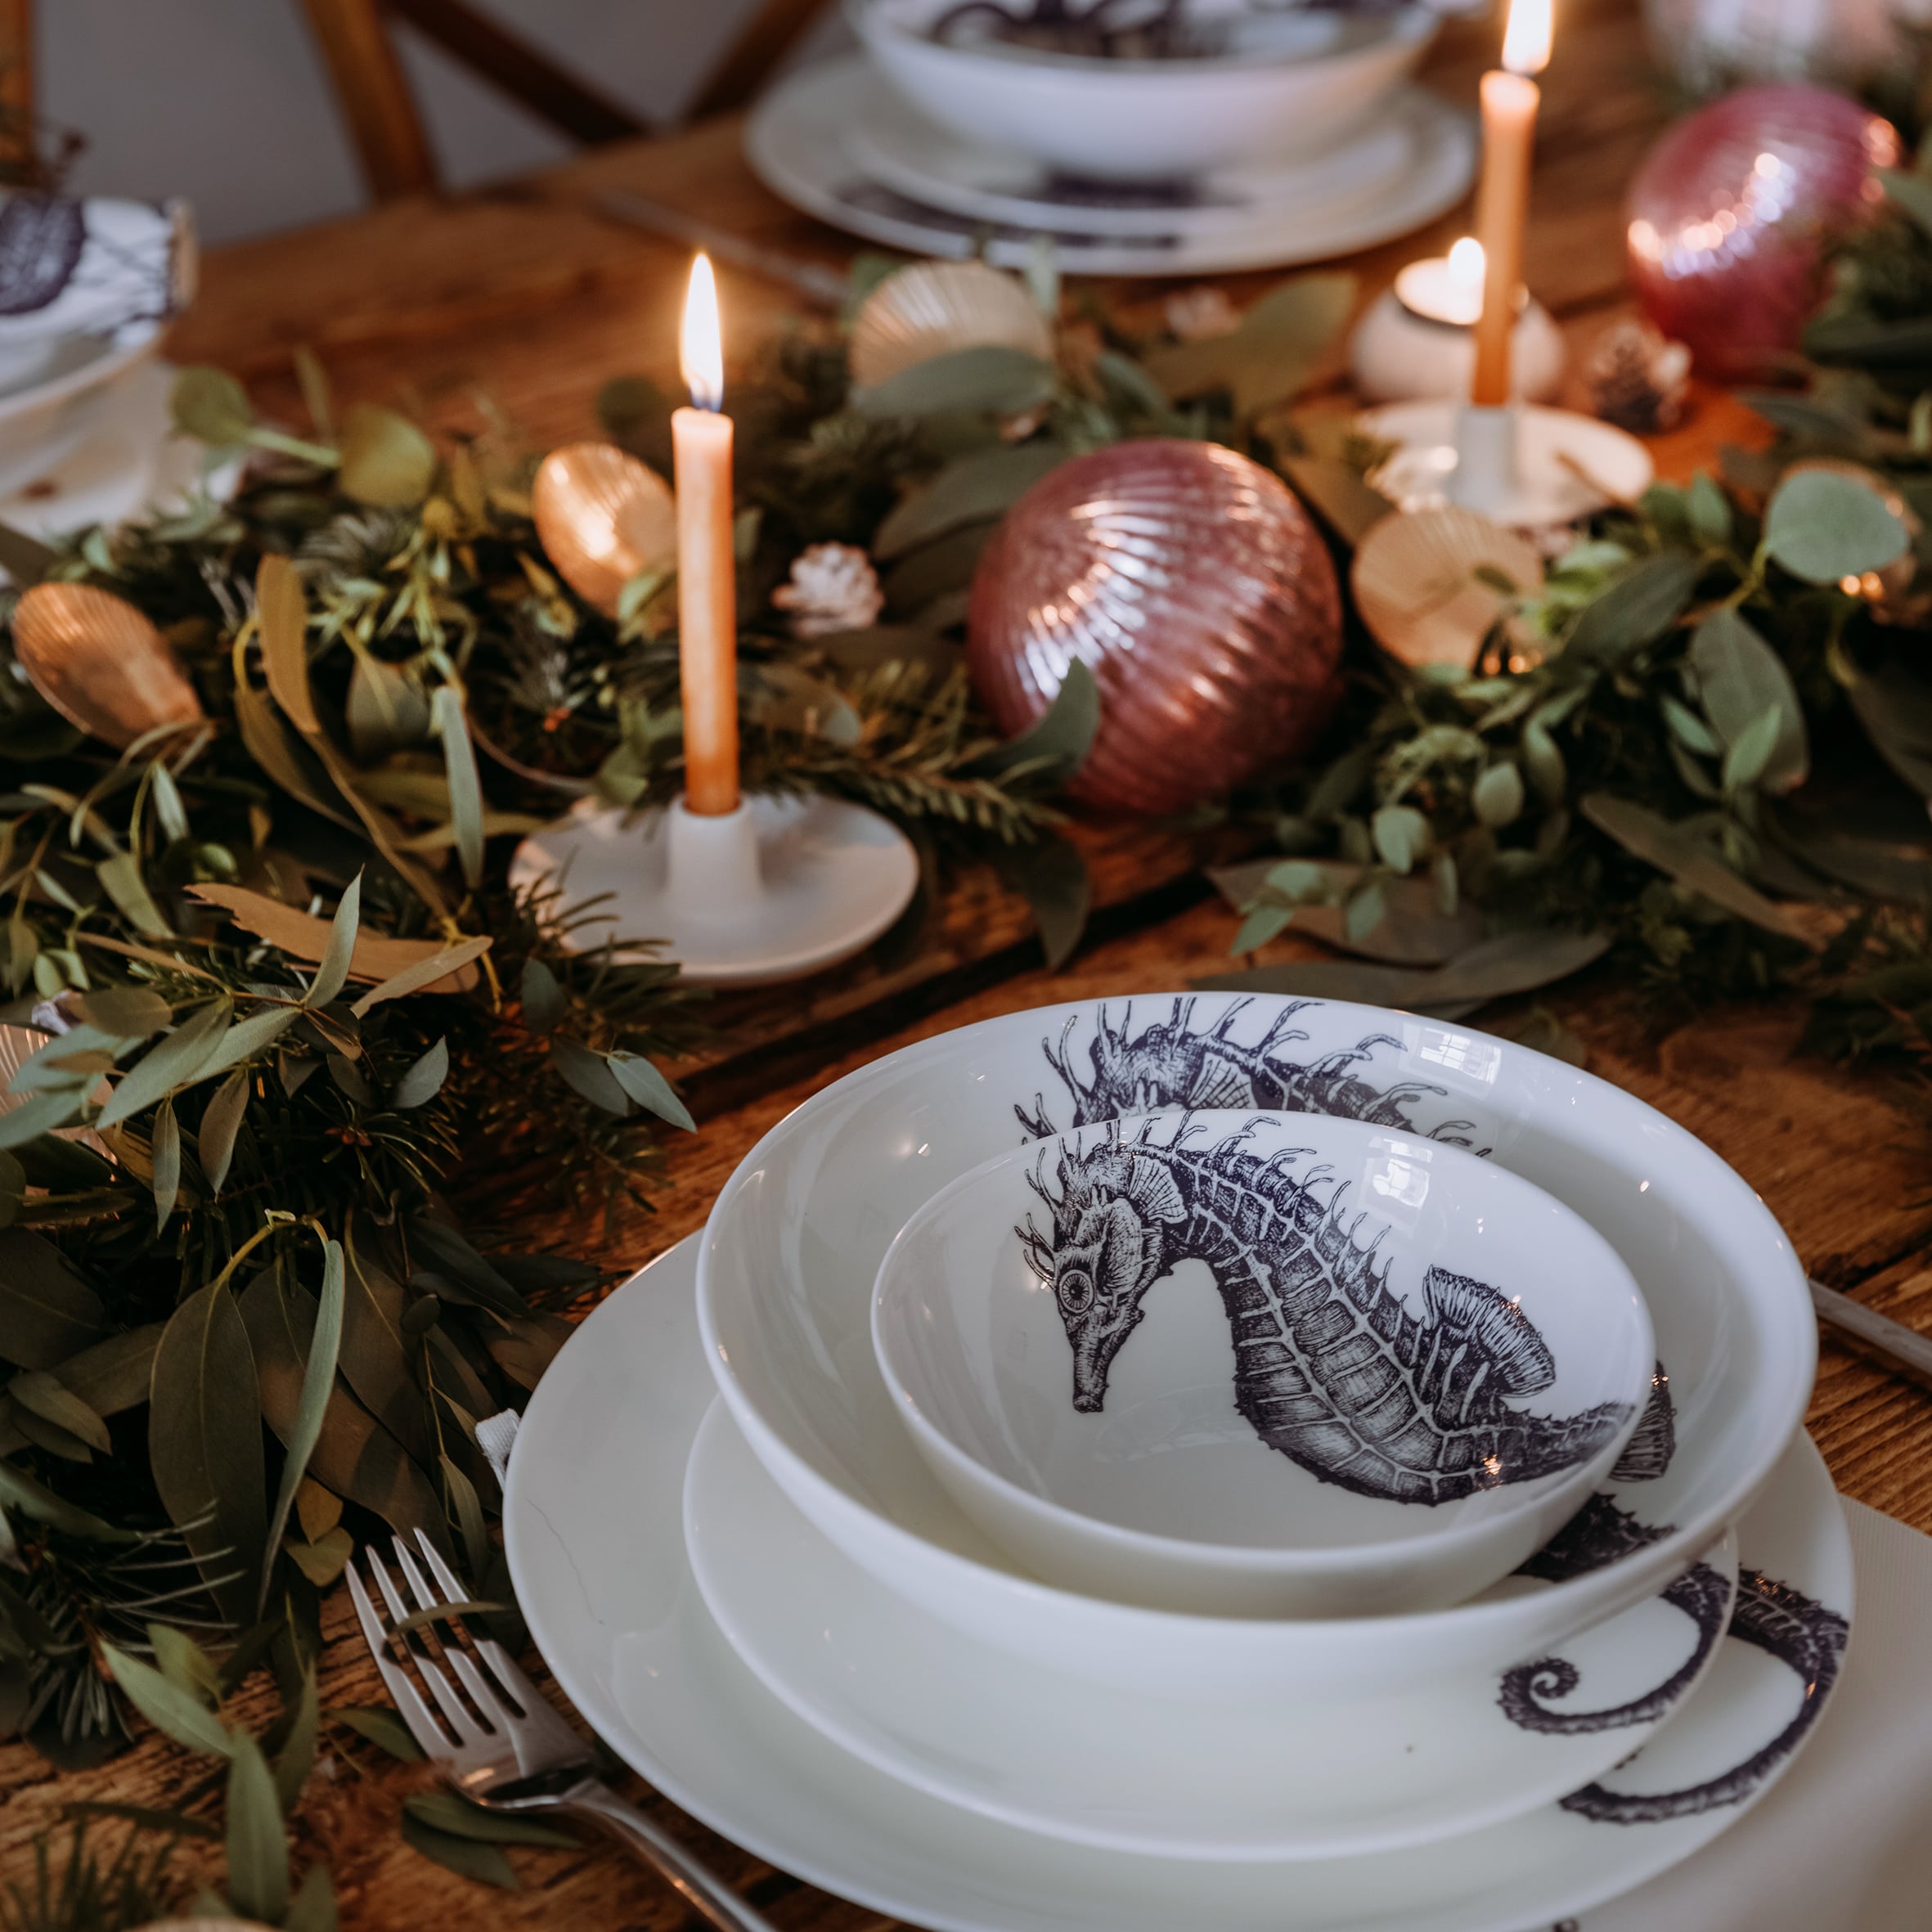 Pasta bowl in Bone China in our Classic range in Navy and white in the Jellyfish design,placed on a matching dinner plate and has a smaller bowl placed inside.All are on a table setting and the table is decorated with foliage and candle holders